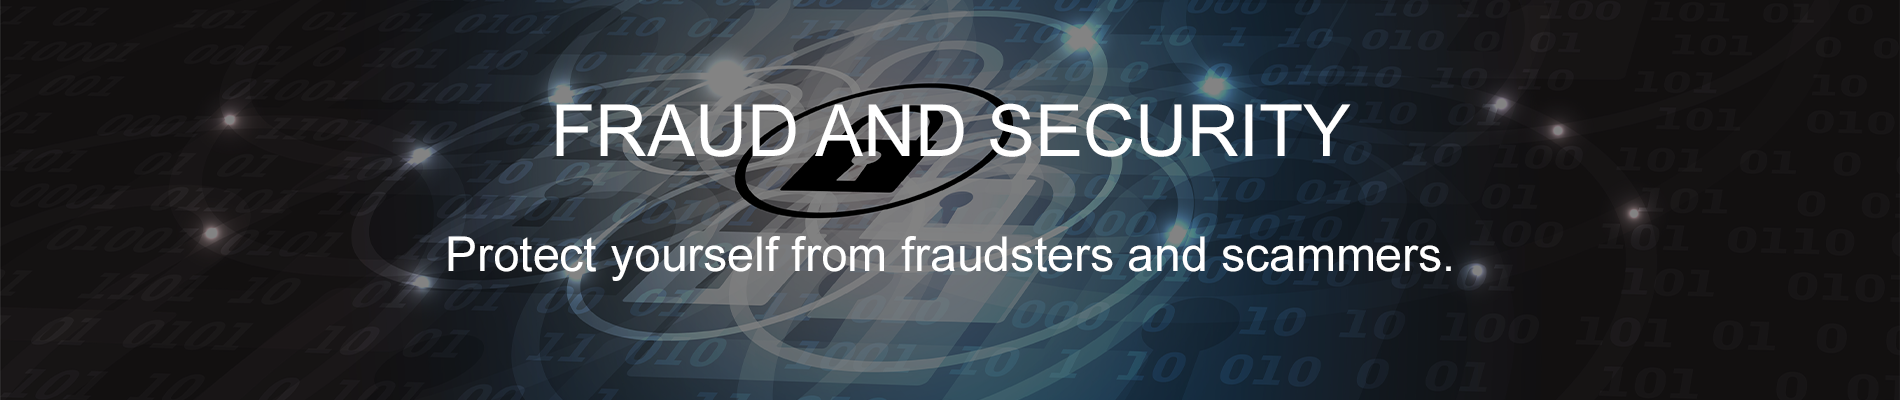 Fraud and Security